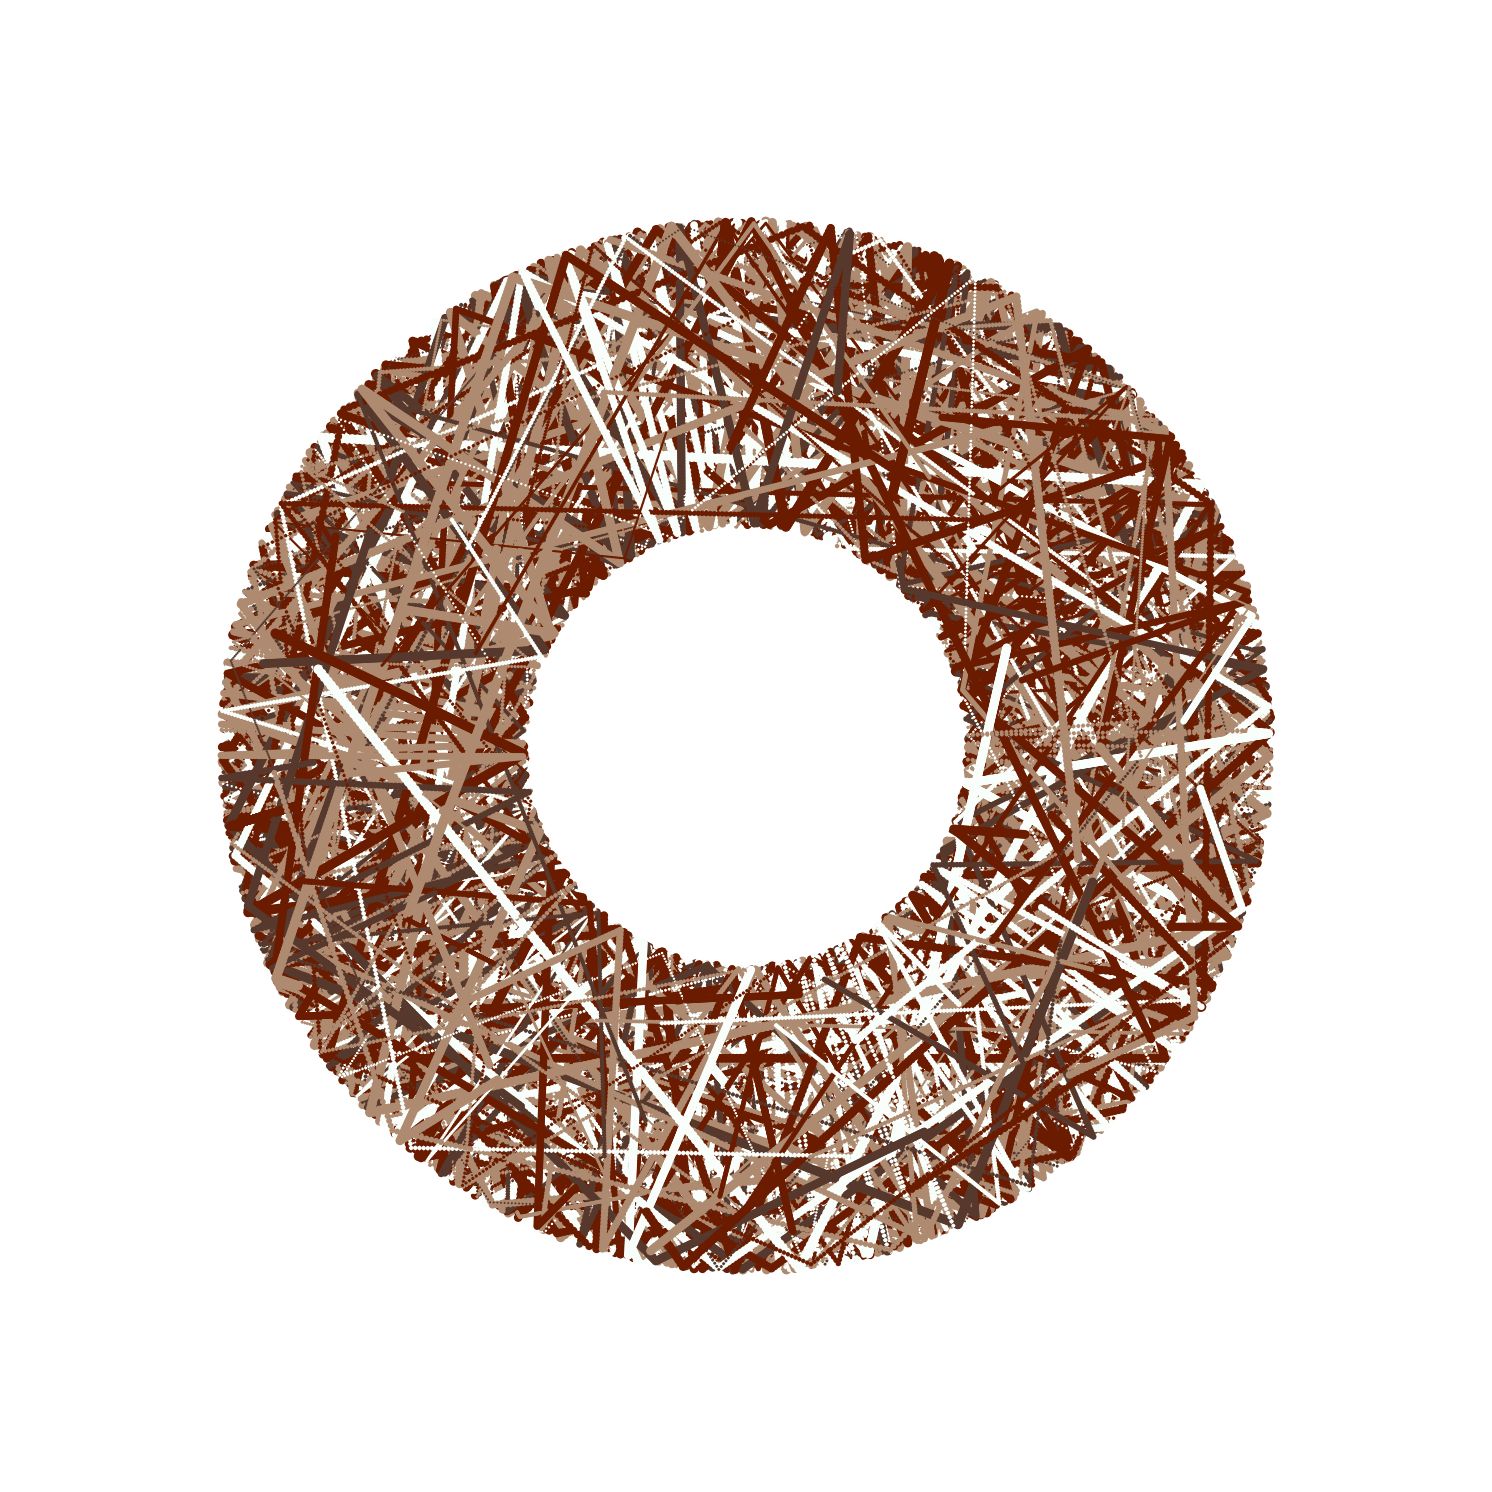 A donut shape in brown and white with many criss-crossing lines inside